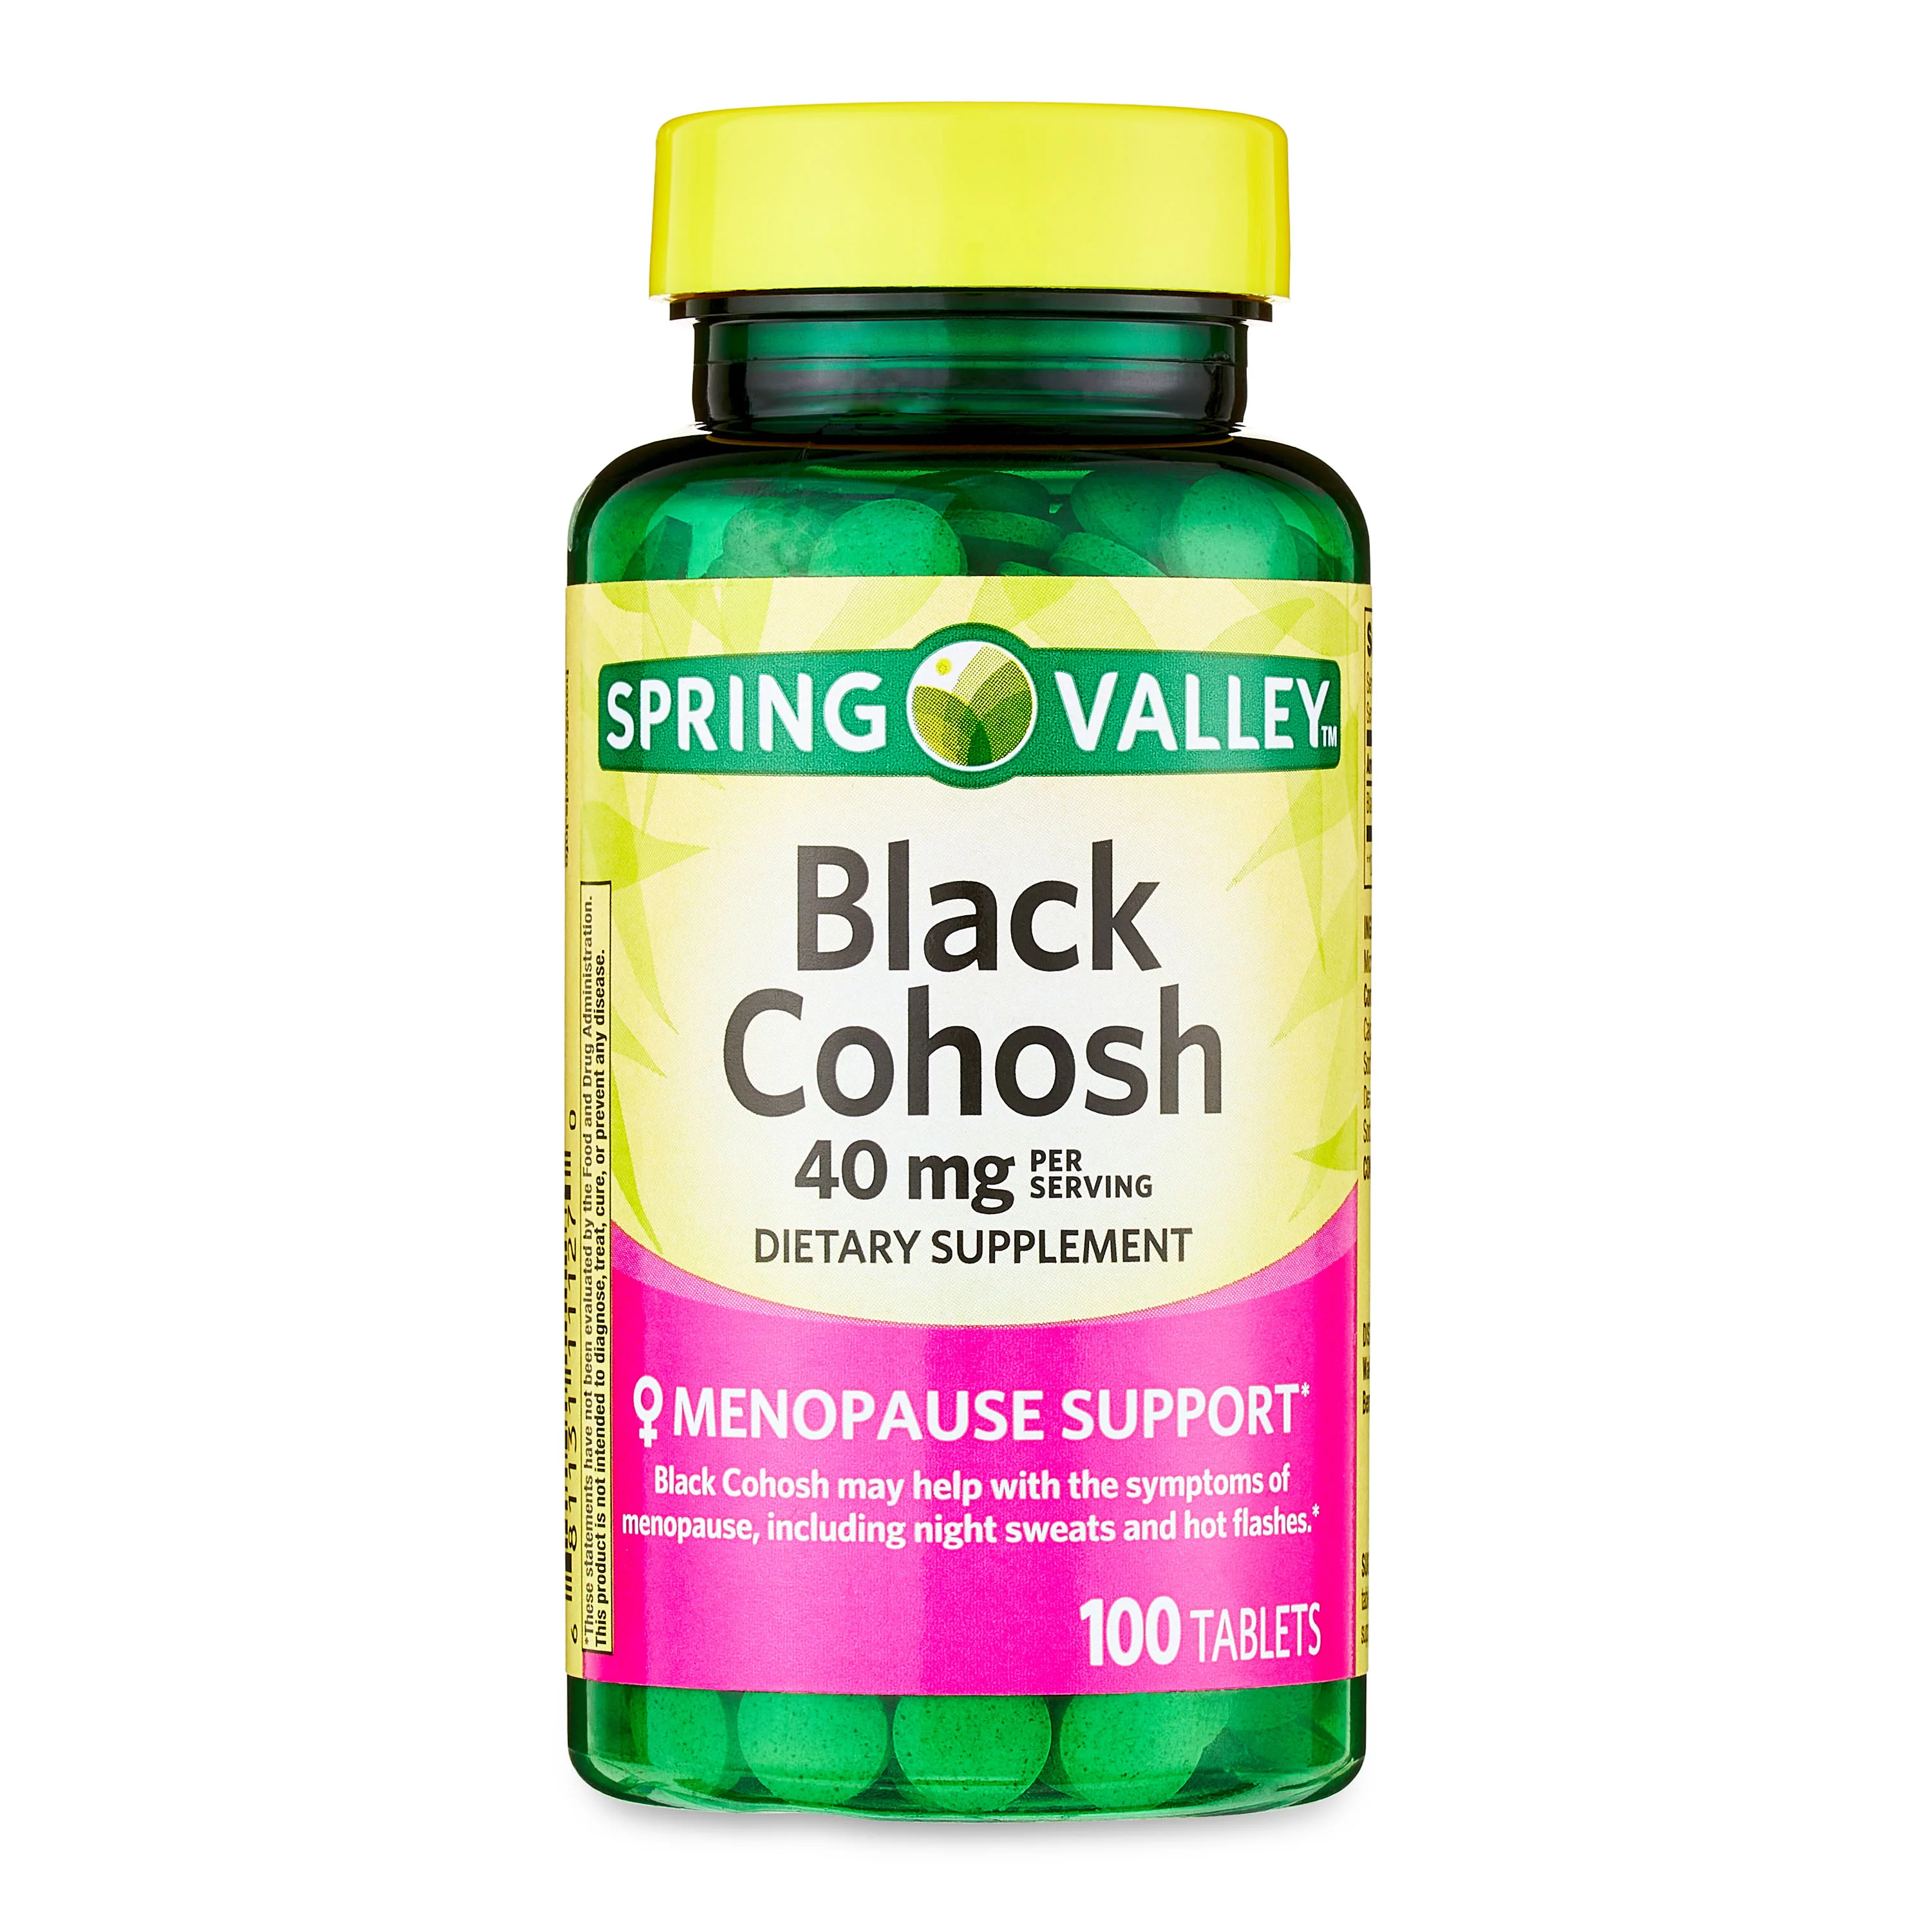 Spring Valley Black Cohosh Menopause Support Dietary Supplement Tablets, 40 mg, 100 Count